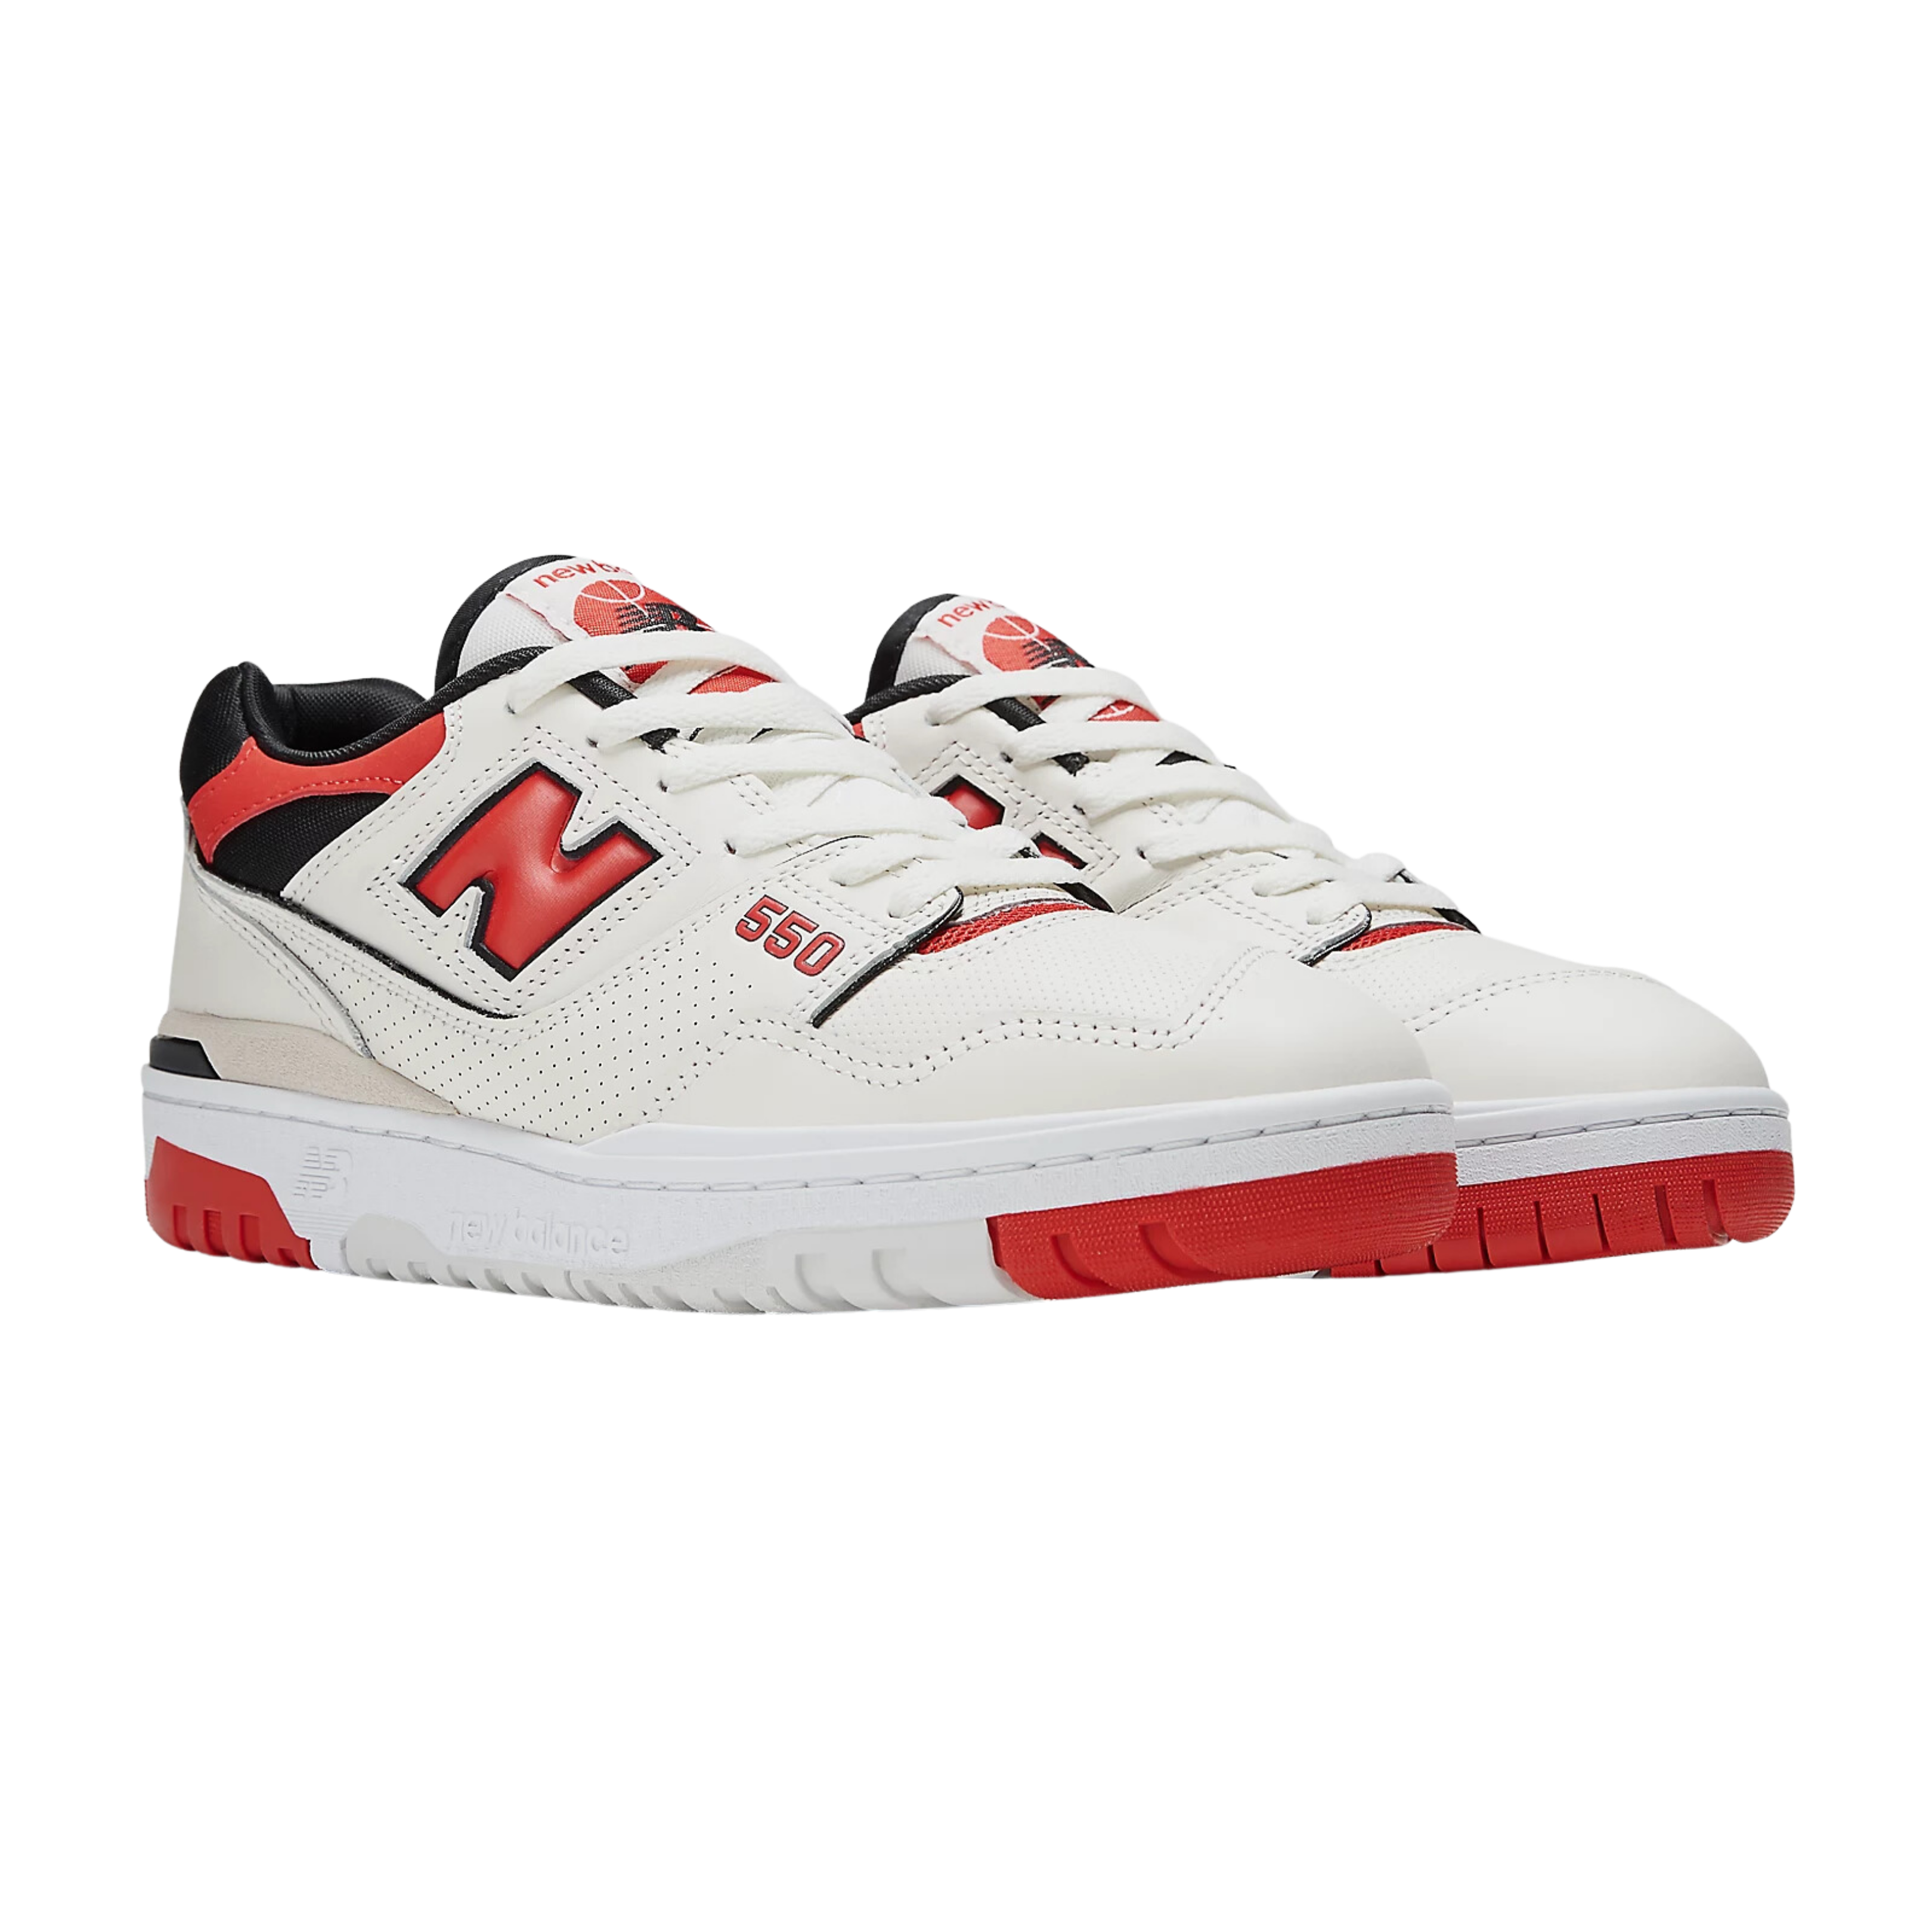 New Balance - Sneaker Donna - Rosso/Bianco